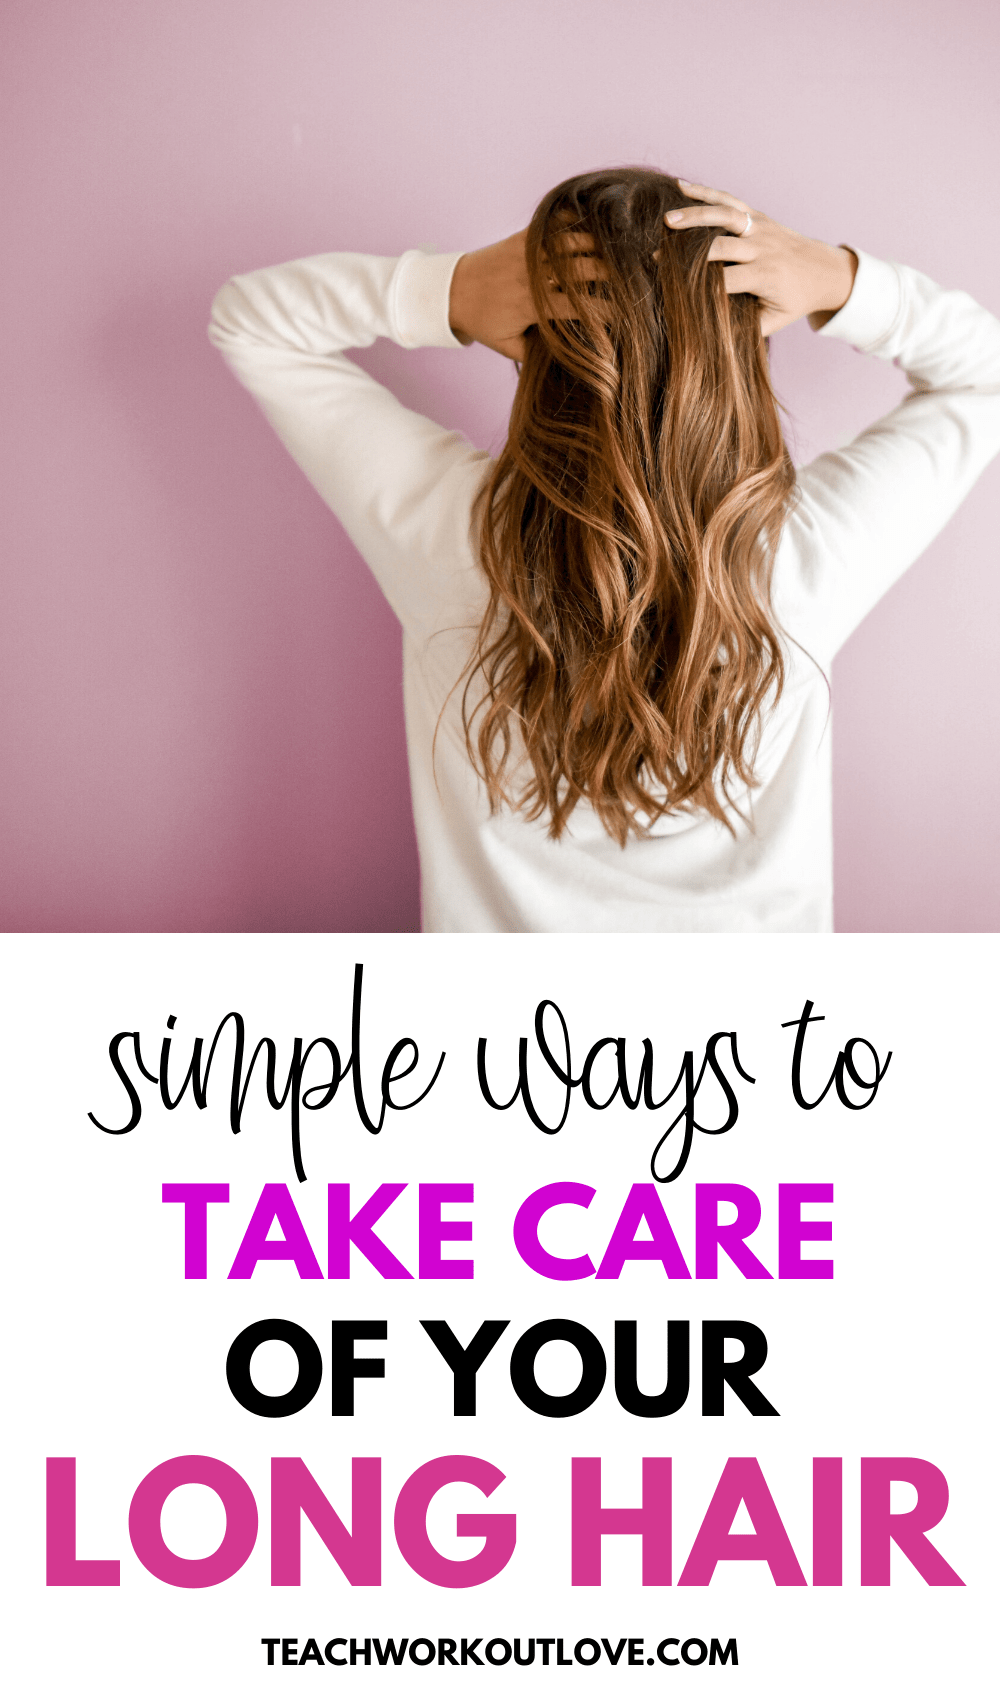 Having long hair and taking its good care is not an easy task. Let’s check out these tips for how to take care of long hair.